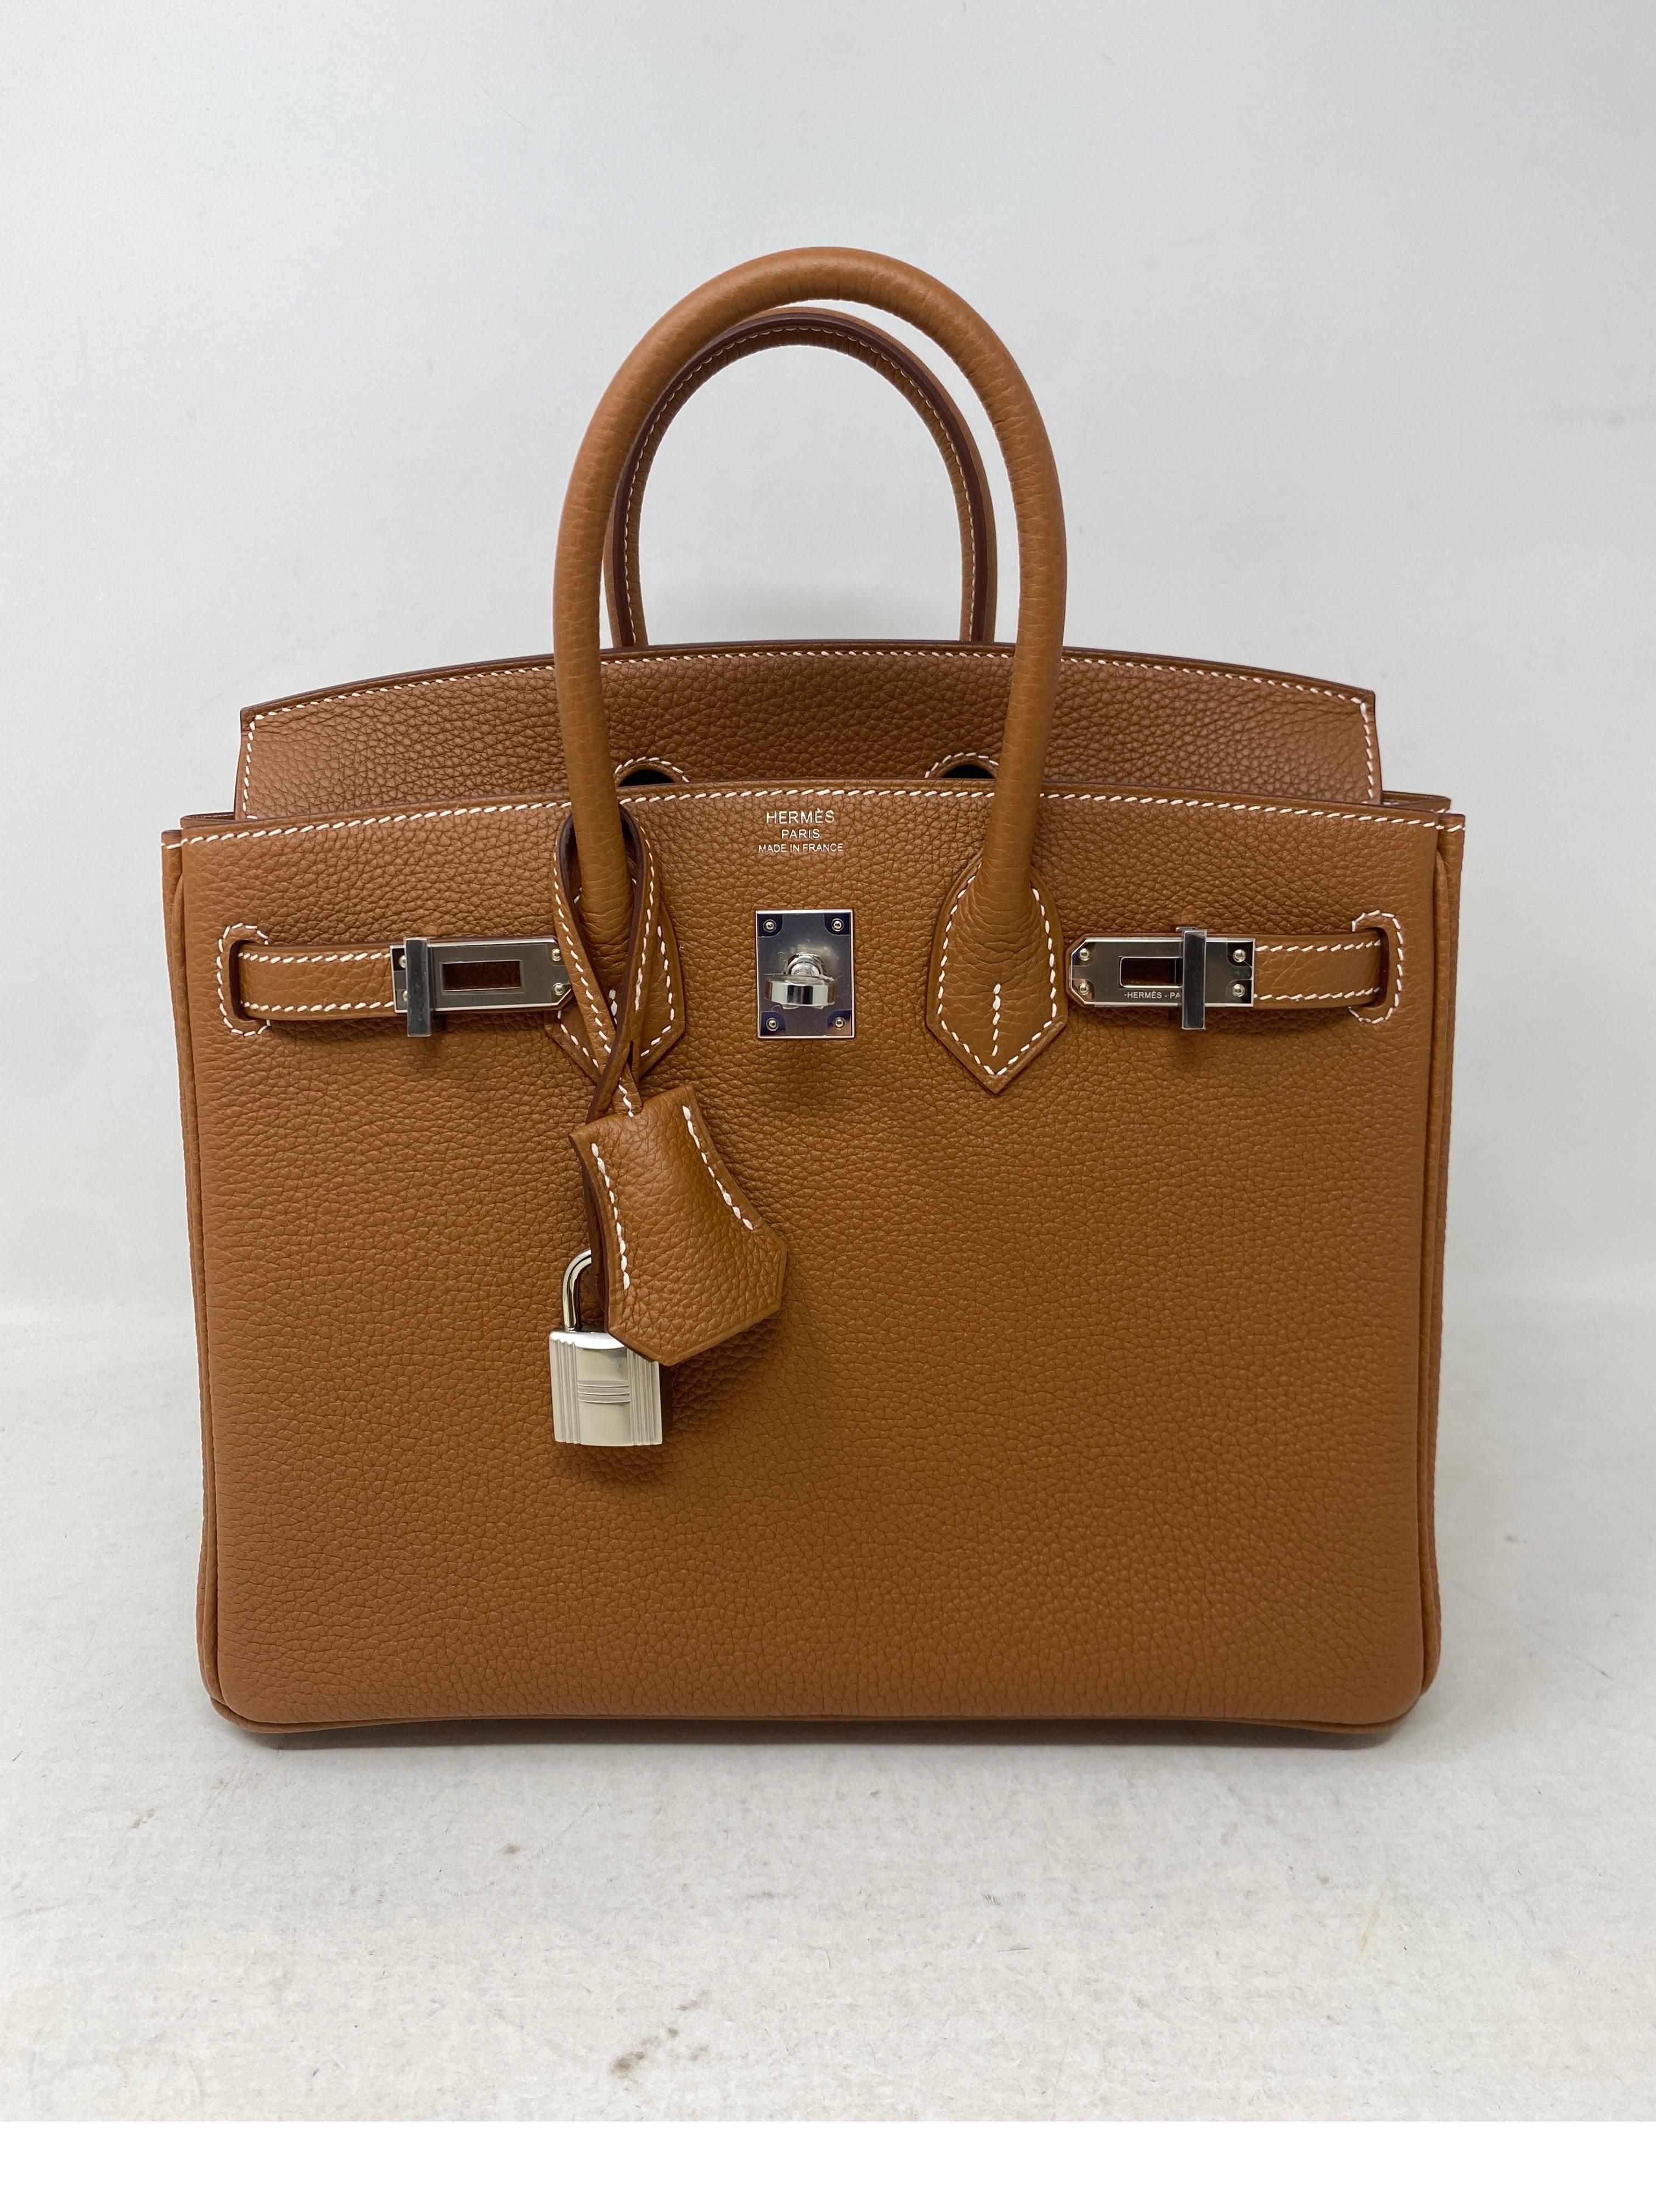 Hermes Gold Birkin 25 Bag. Palladium hardware with gold tan color. Rare unicorn size 25 Birkin. Don't miss out on this one. Very difficult to find and it is brand new. Full set. Includes clochette, lock, keys, rain jacket, dust bag and box. This